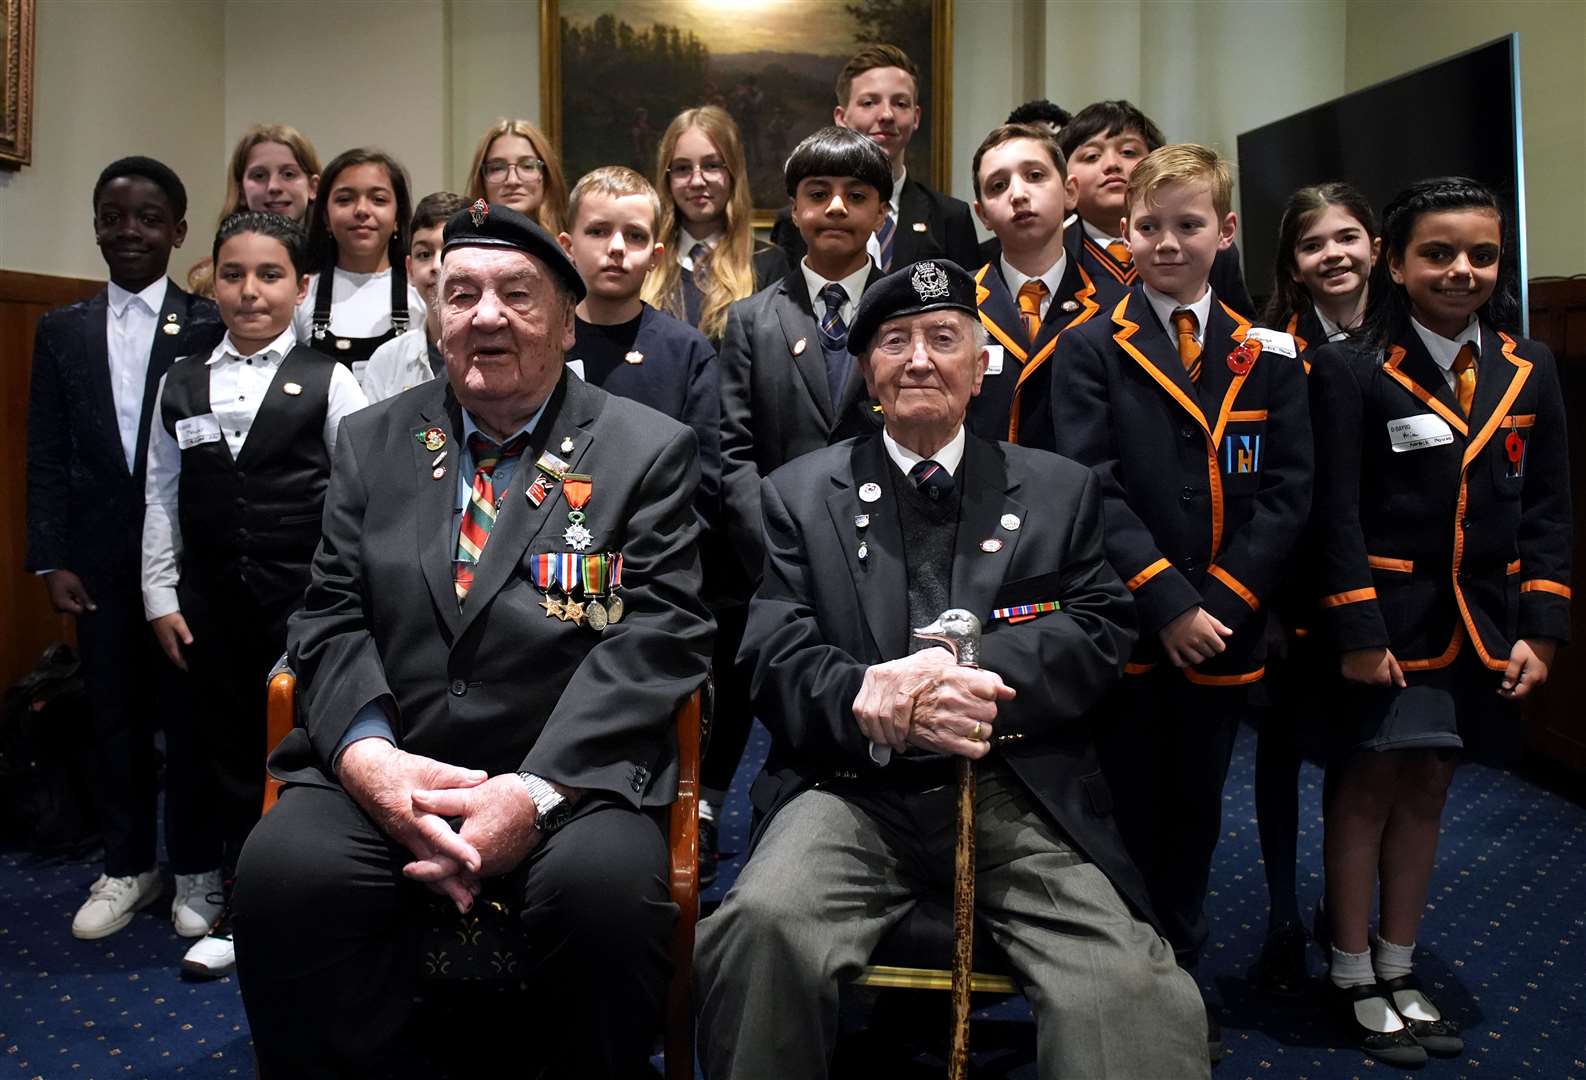 D-Day veterans meeting schoolchildren during Meet the Veterans: A History Lesson With Those Who Were There, at the Union Jack Club in London (Gareth Fuller/PA)